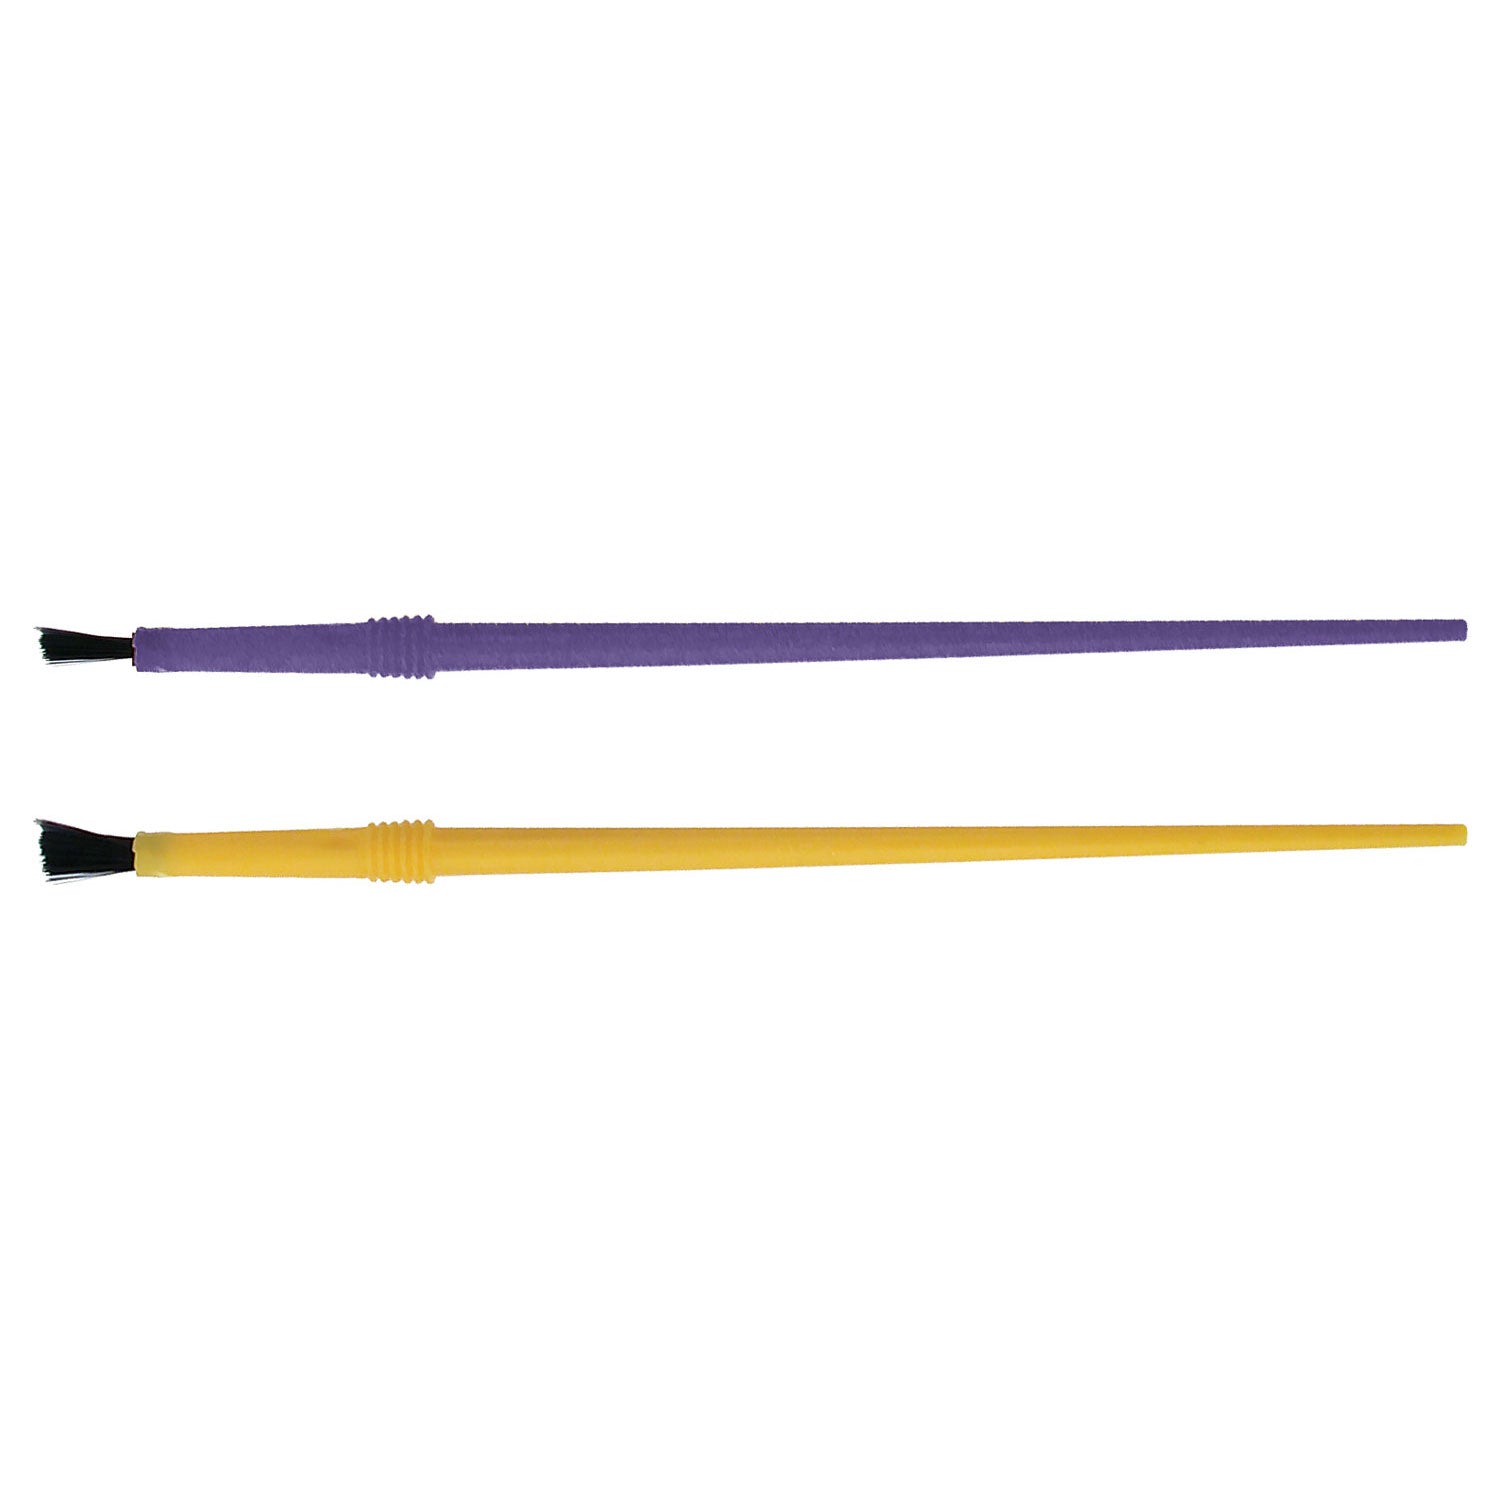 Buy Flexcoat Uv Rod Finish Products Online in Nasinu at Best